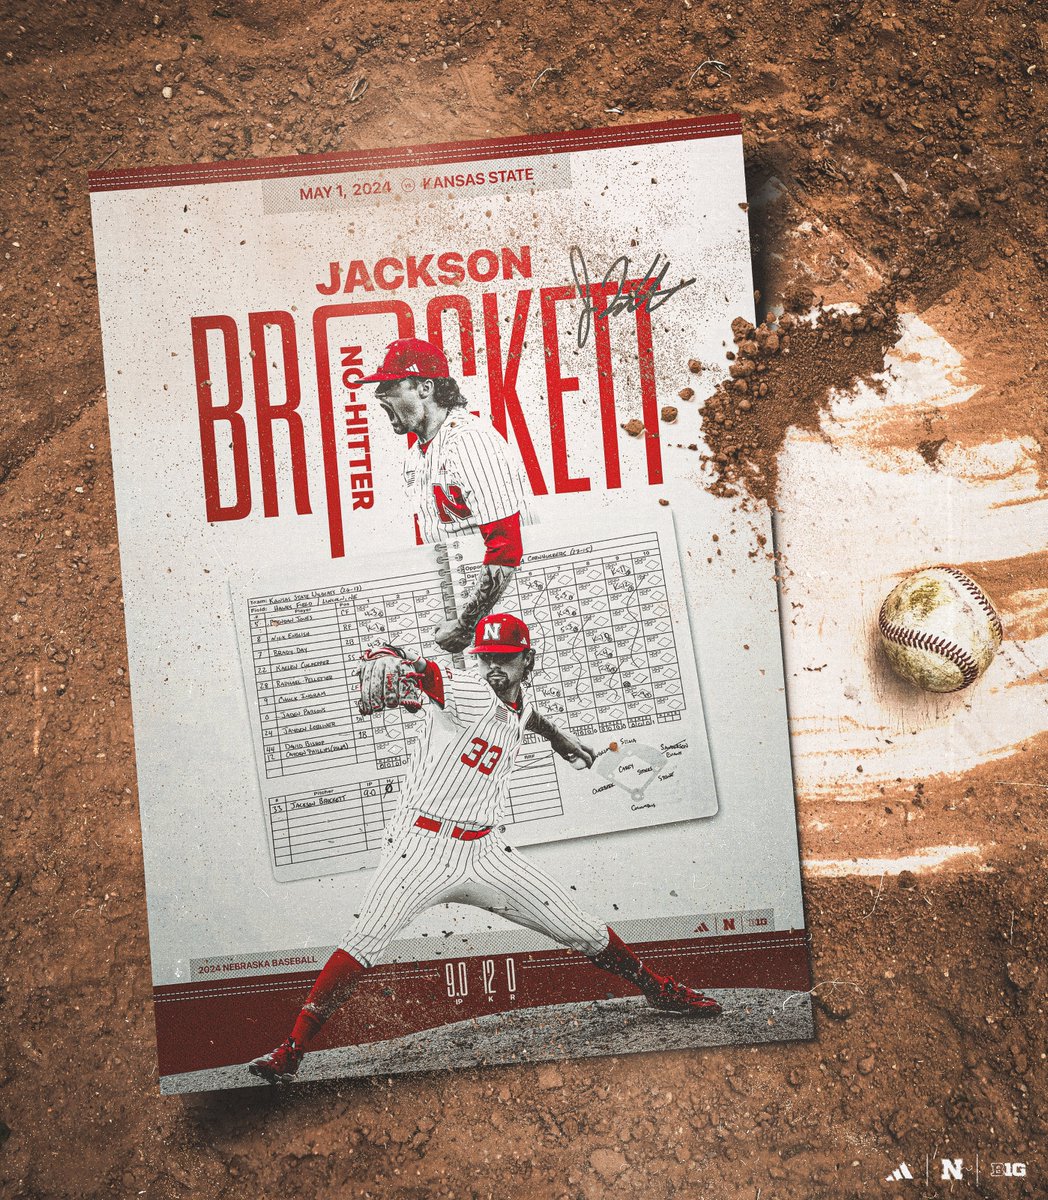 A performance worthy of a poster.

The first 500 fans at Haymarket Park tonight will receive this @JaxBrockett13 no-hitter memento. 🖼️💎